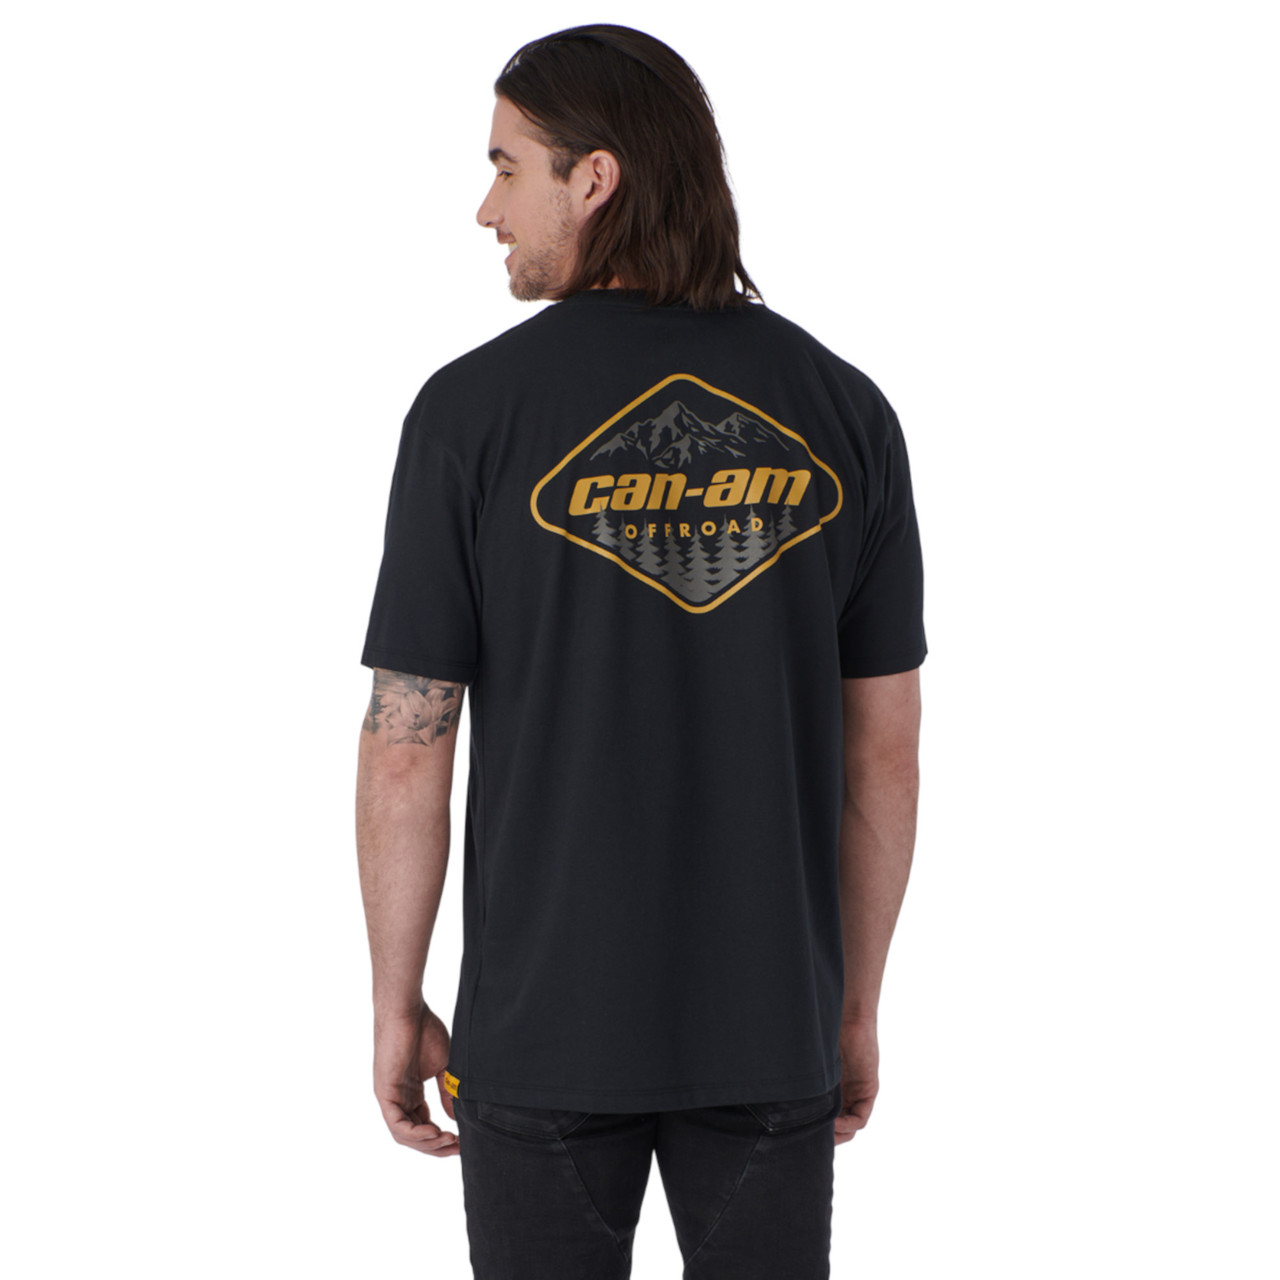 Can-Am New OEM, Men's Large Cotton Branded Off-Road T-Shirt, 4547590990